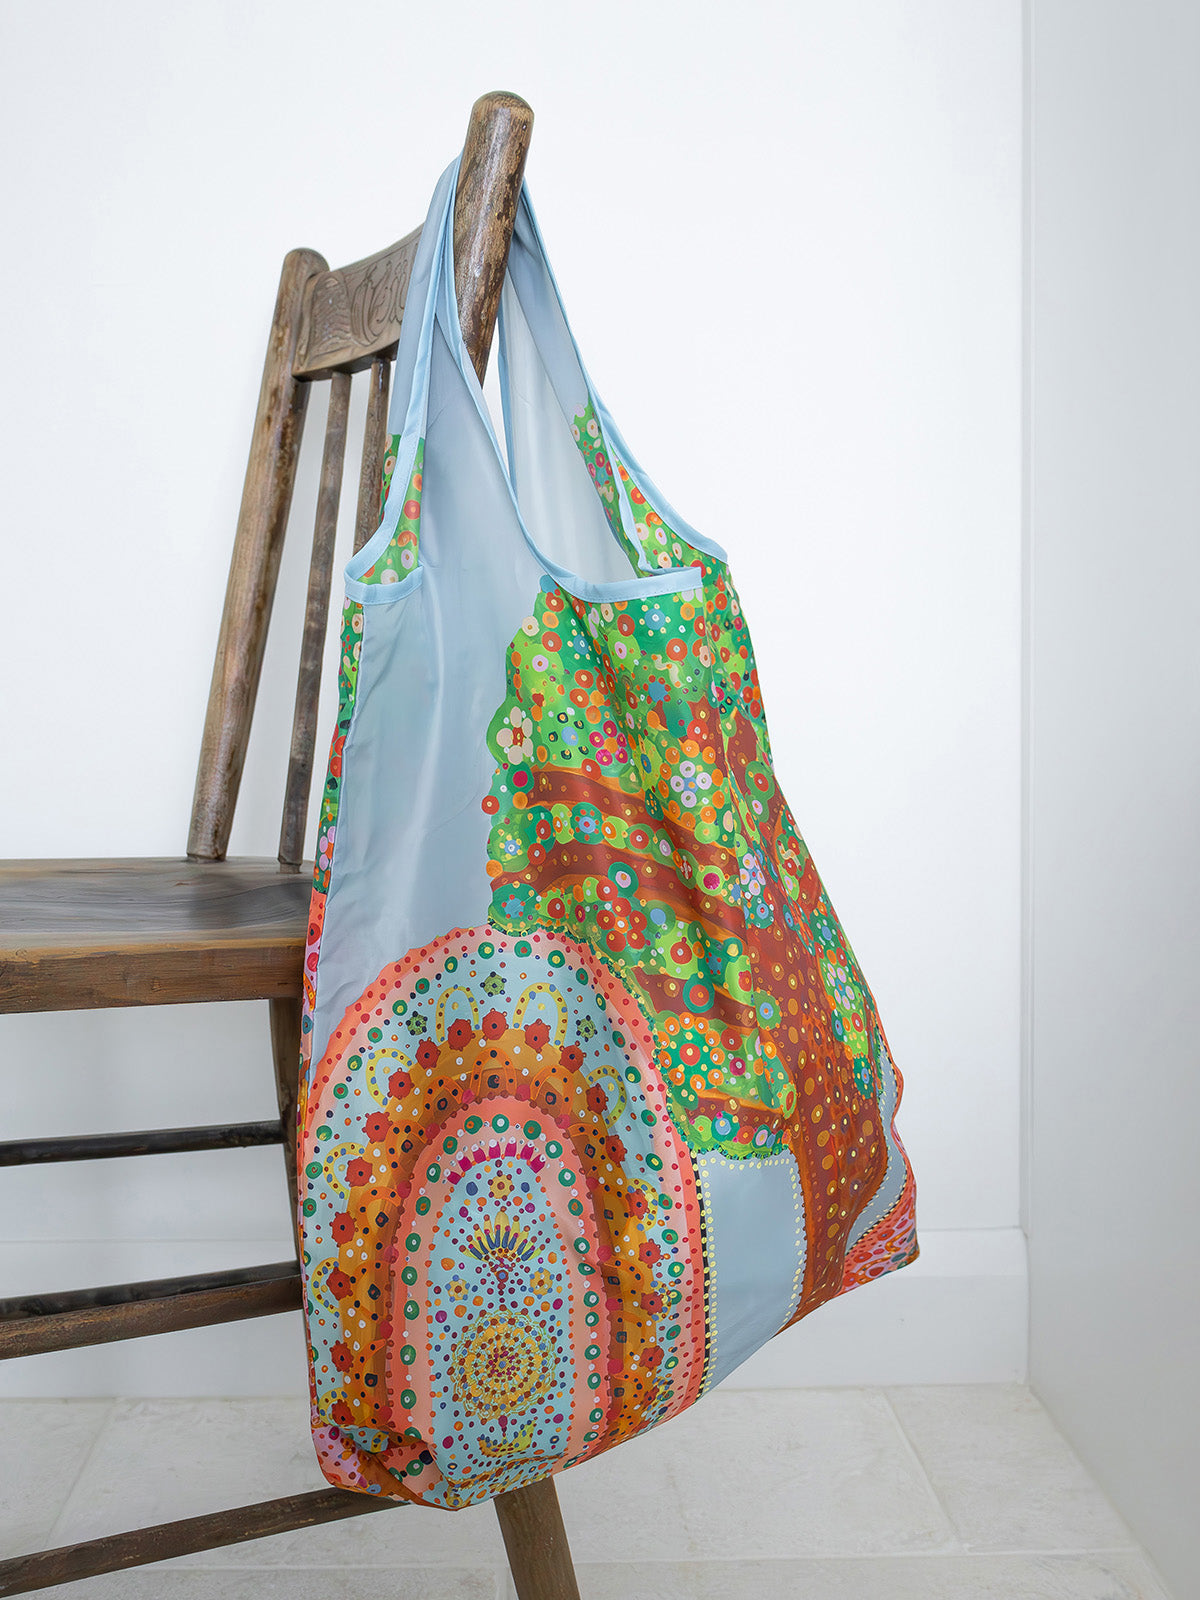 Recycled Plastic Bottle Bag - Tree of Life